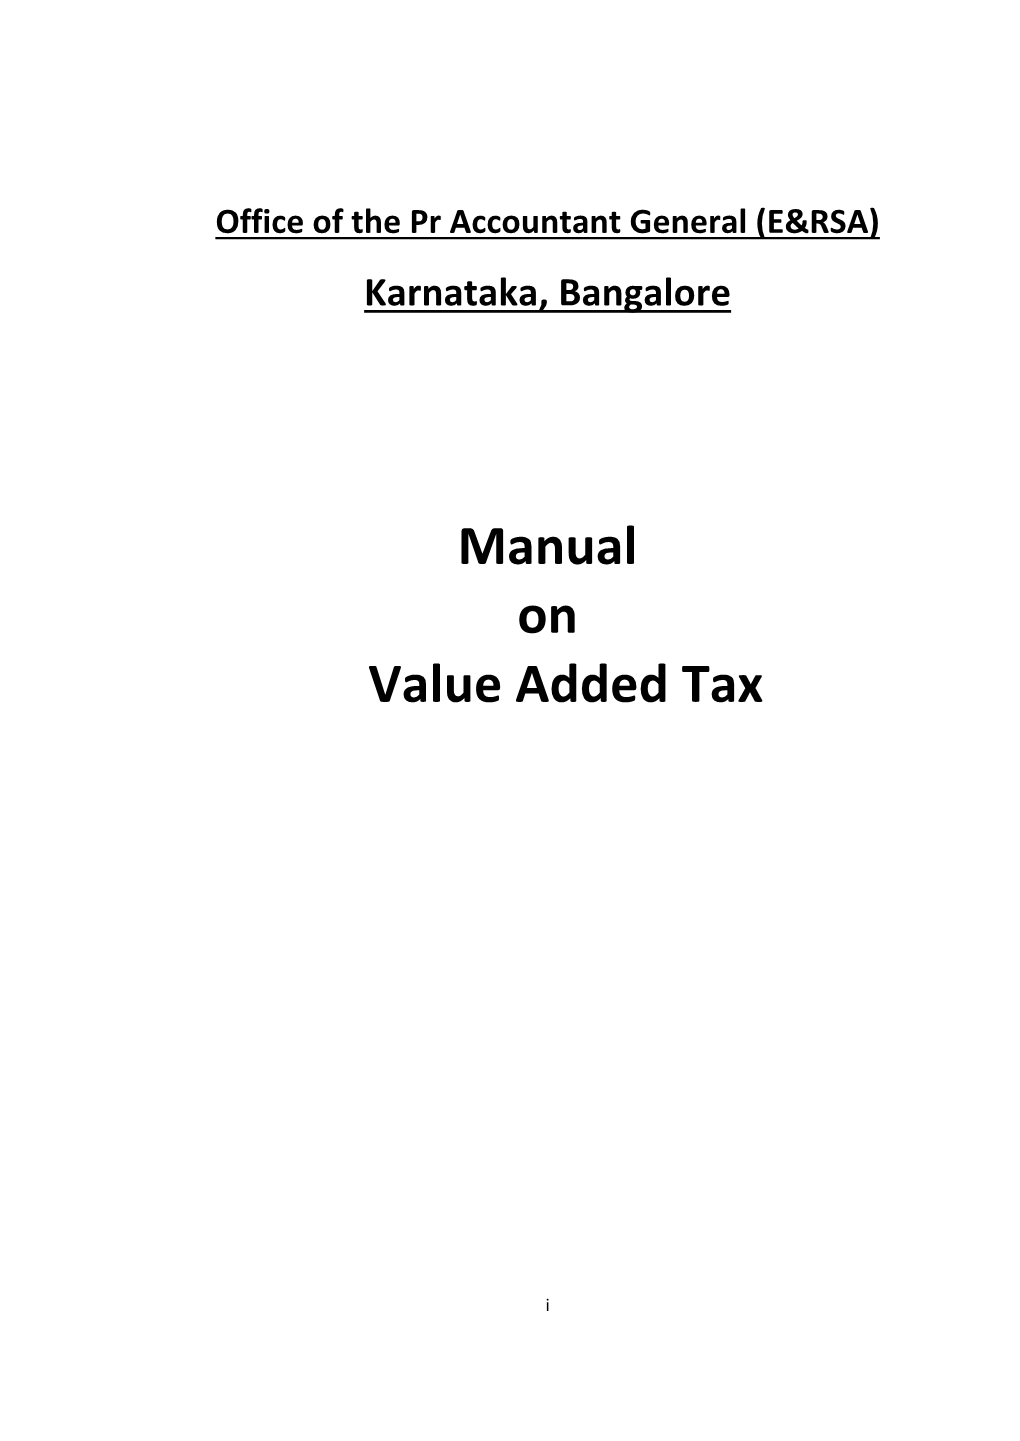 Manual on Value Added